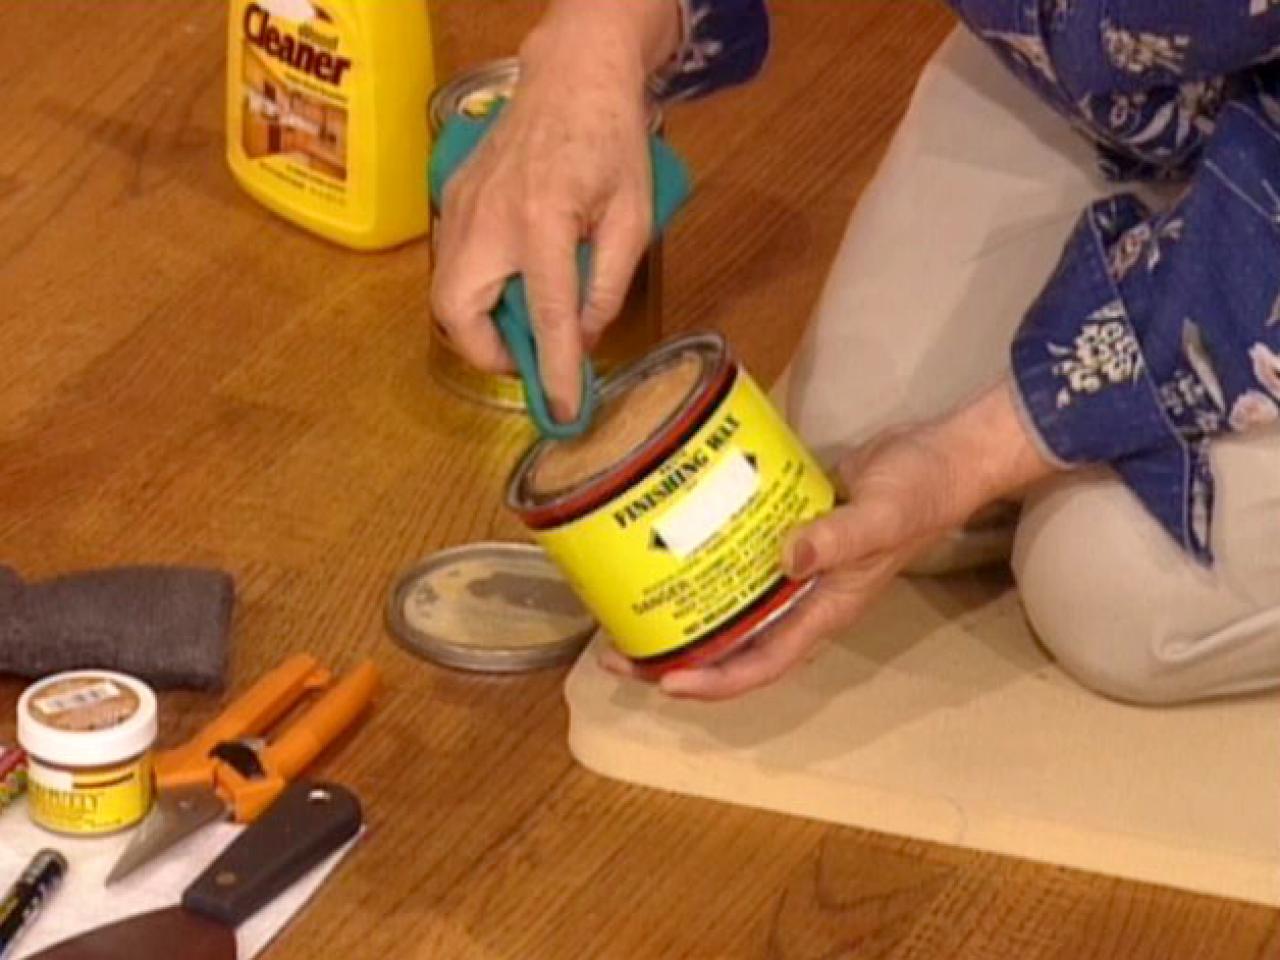 How To Touch Up Wood Floors Tos Diy, How To Remove Wax From Hardwood Floors